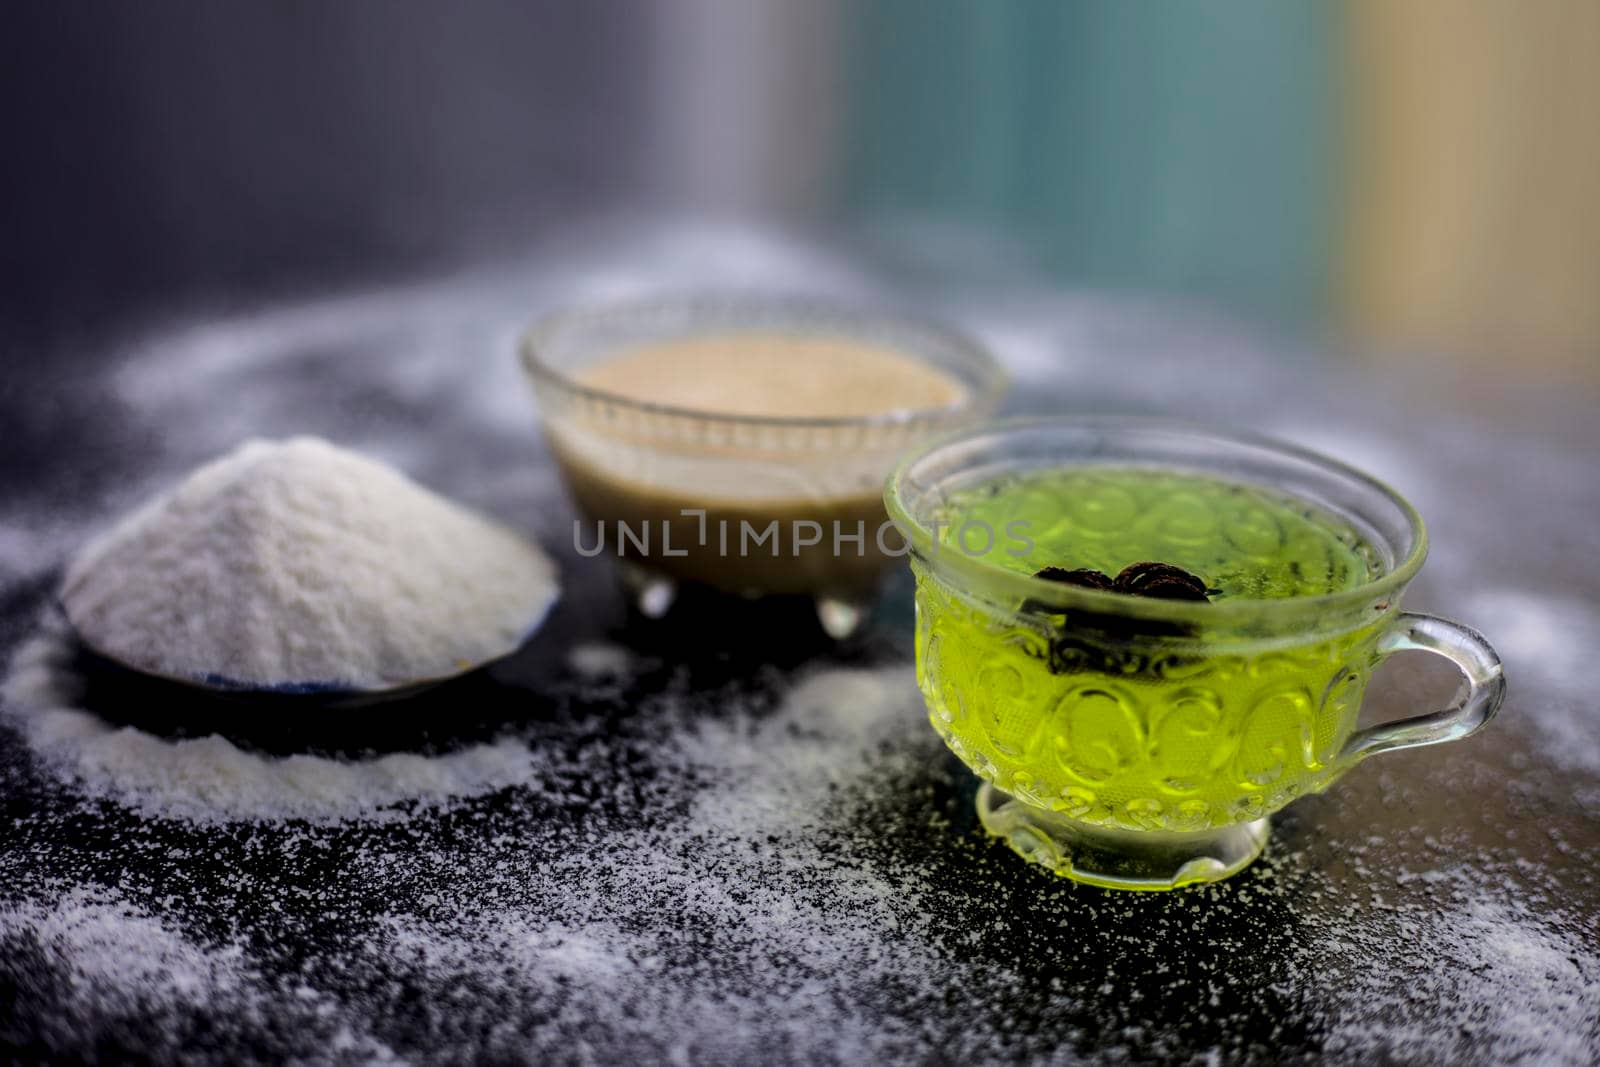 Rice flour and rice grain on wooden surface along with some green tea in a transparent glass cup and a star anise in it.Face mask for the treatment for smoother skin.